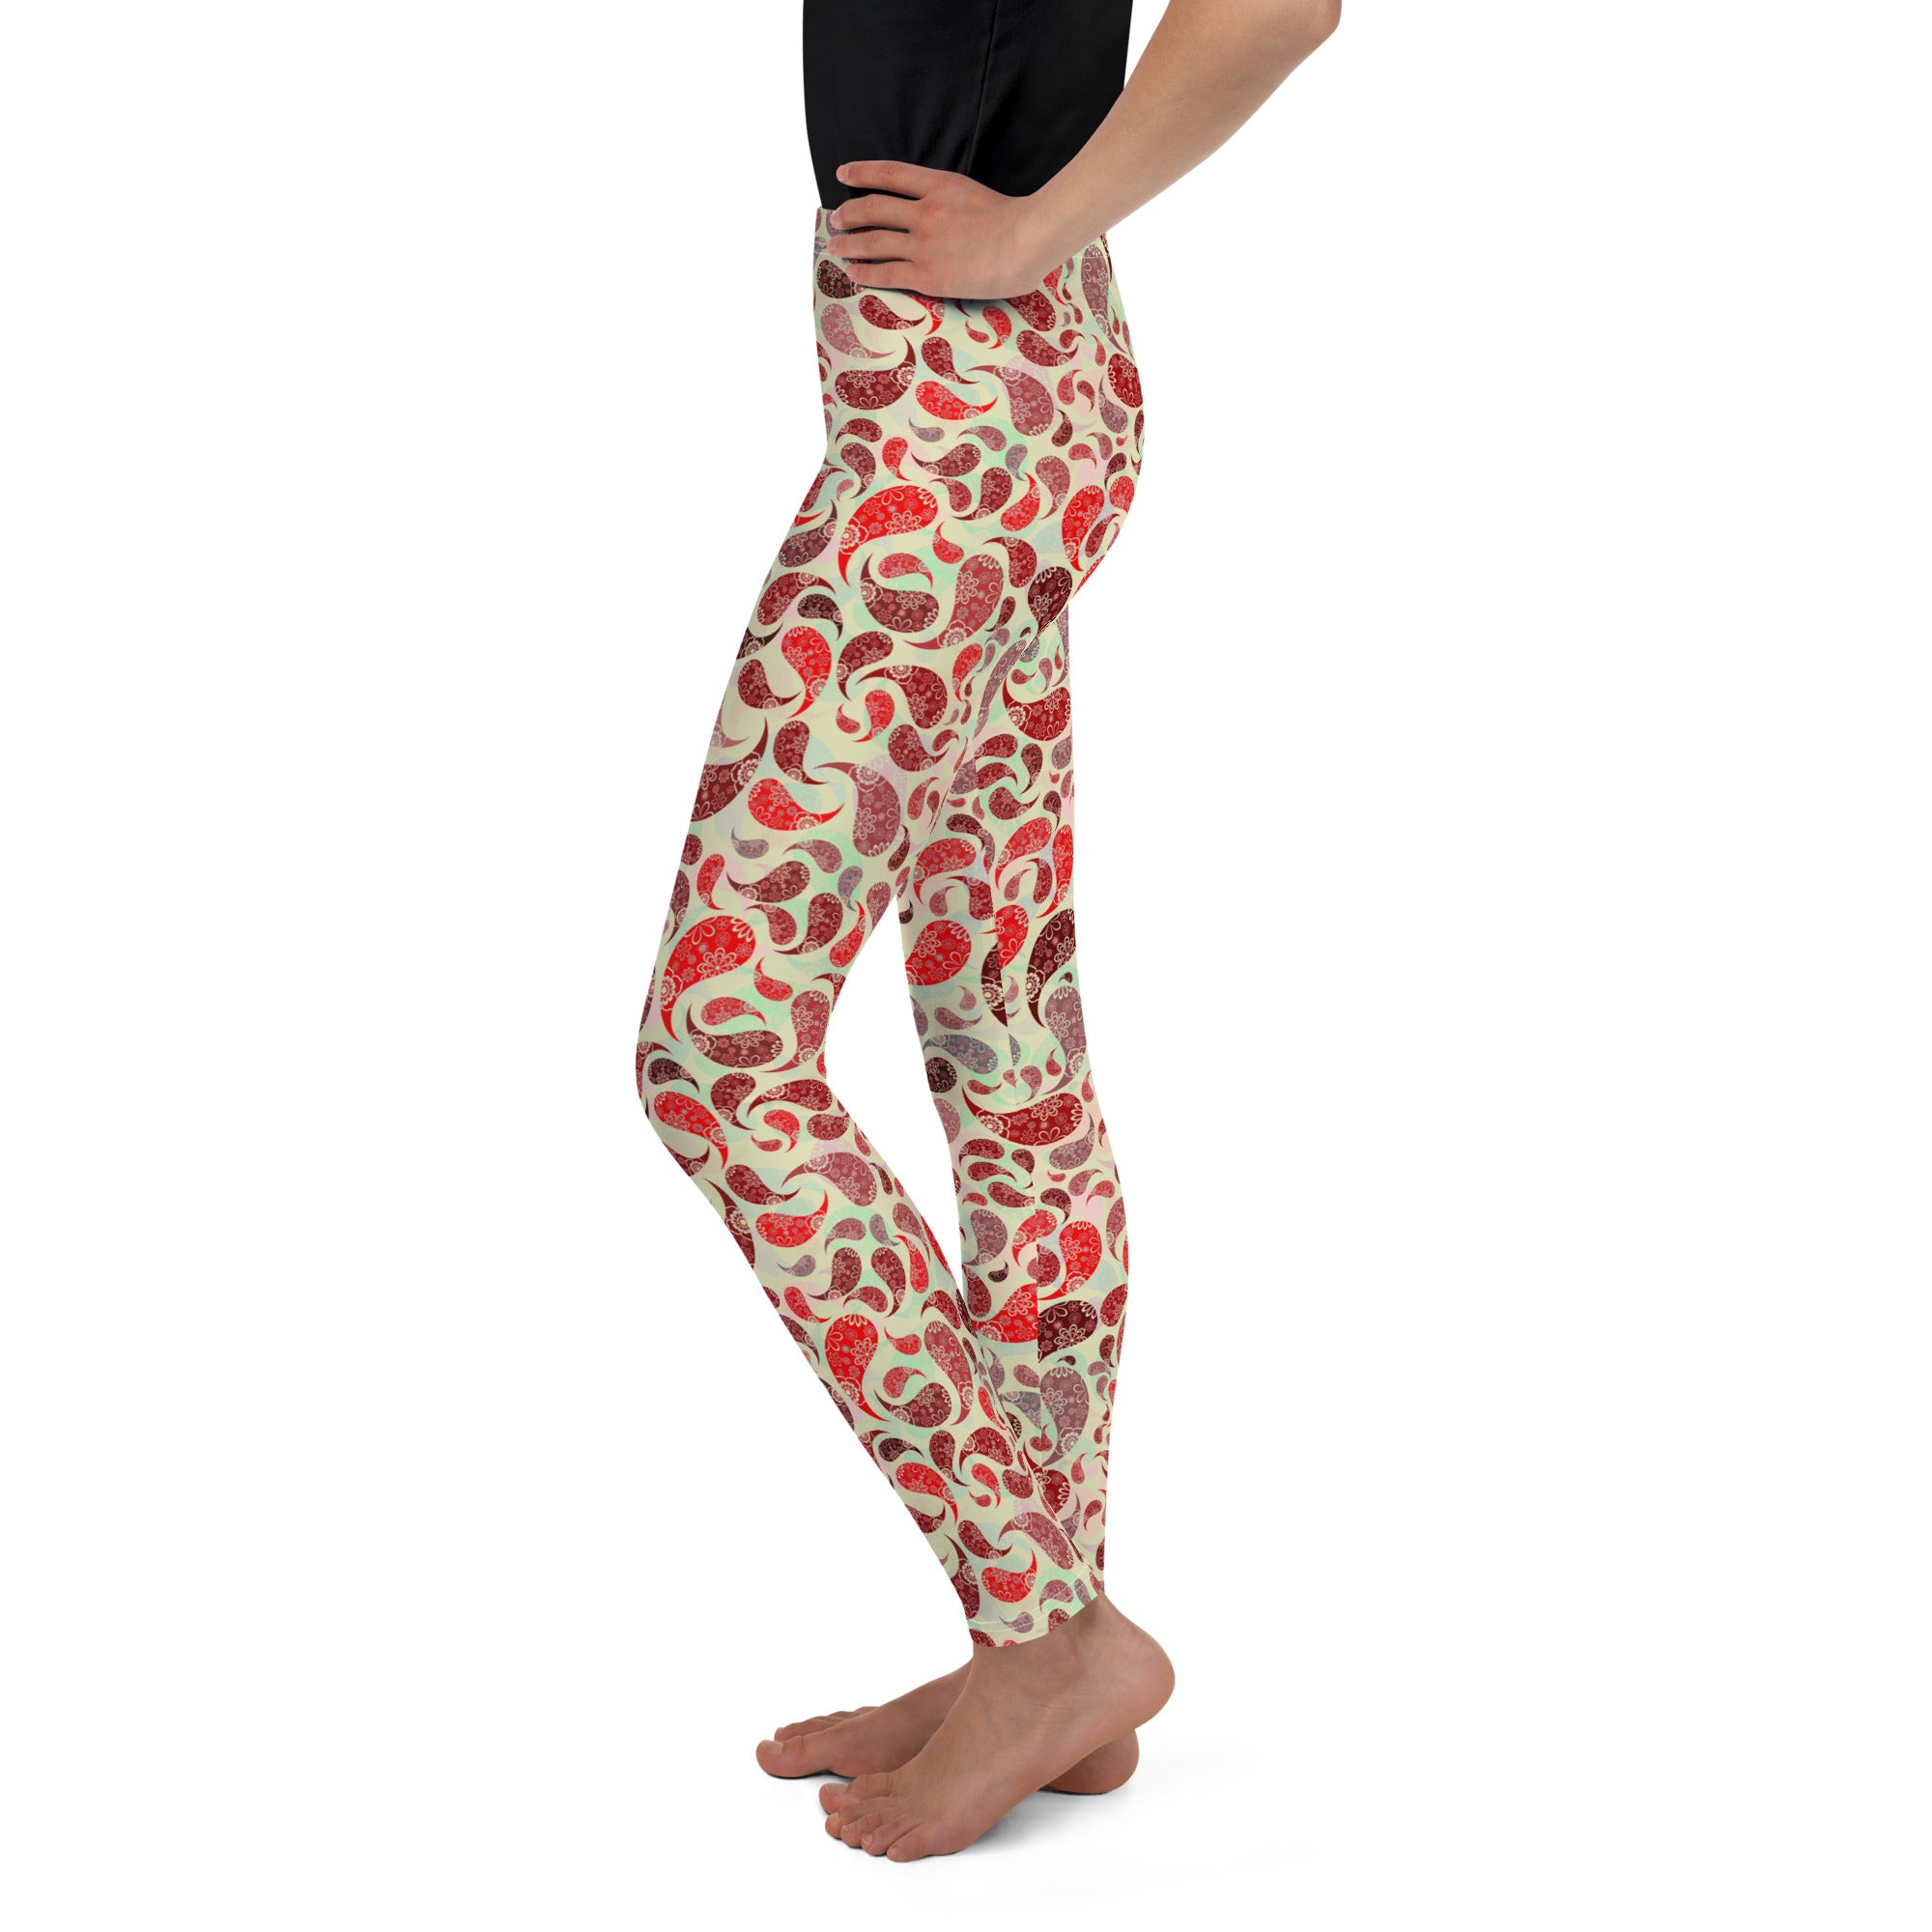 Youth Leggings- Paisley Red